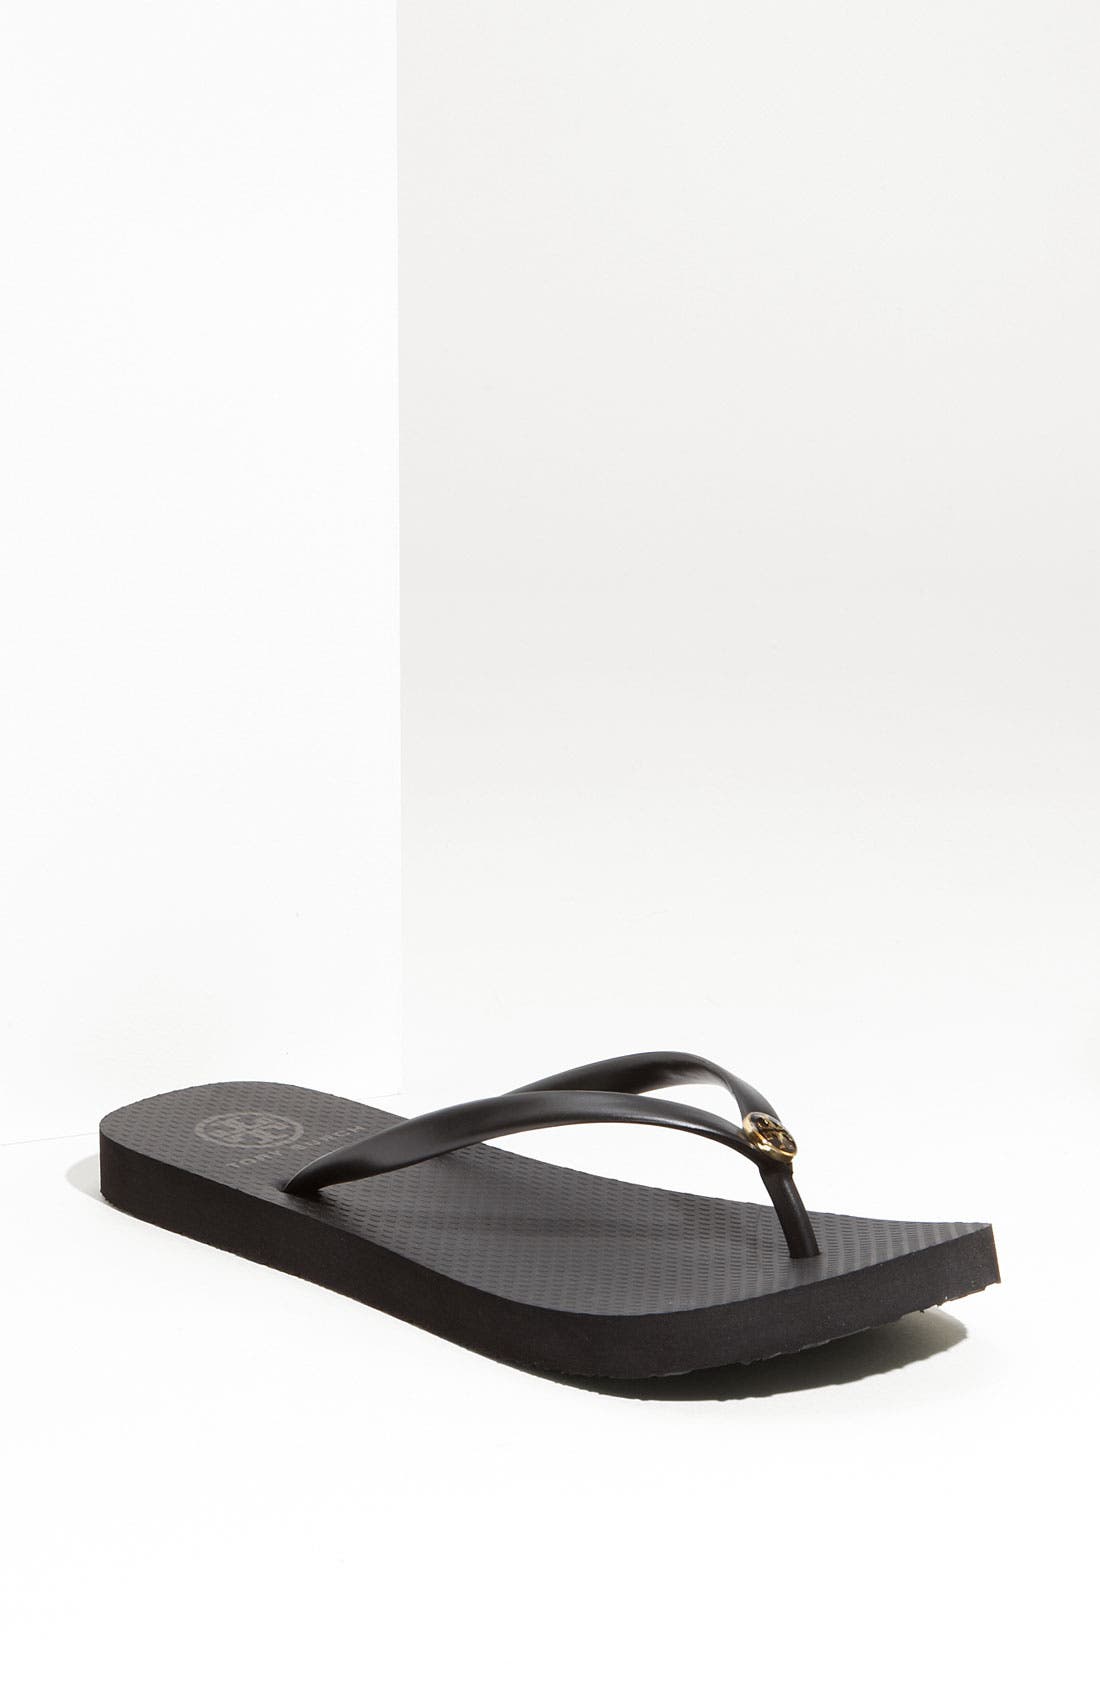 nordstrom shoes womens sandals